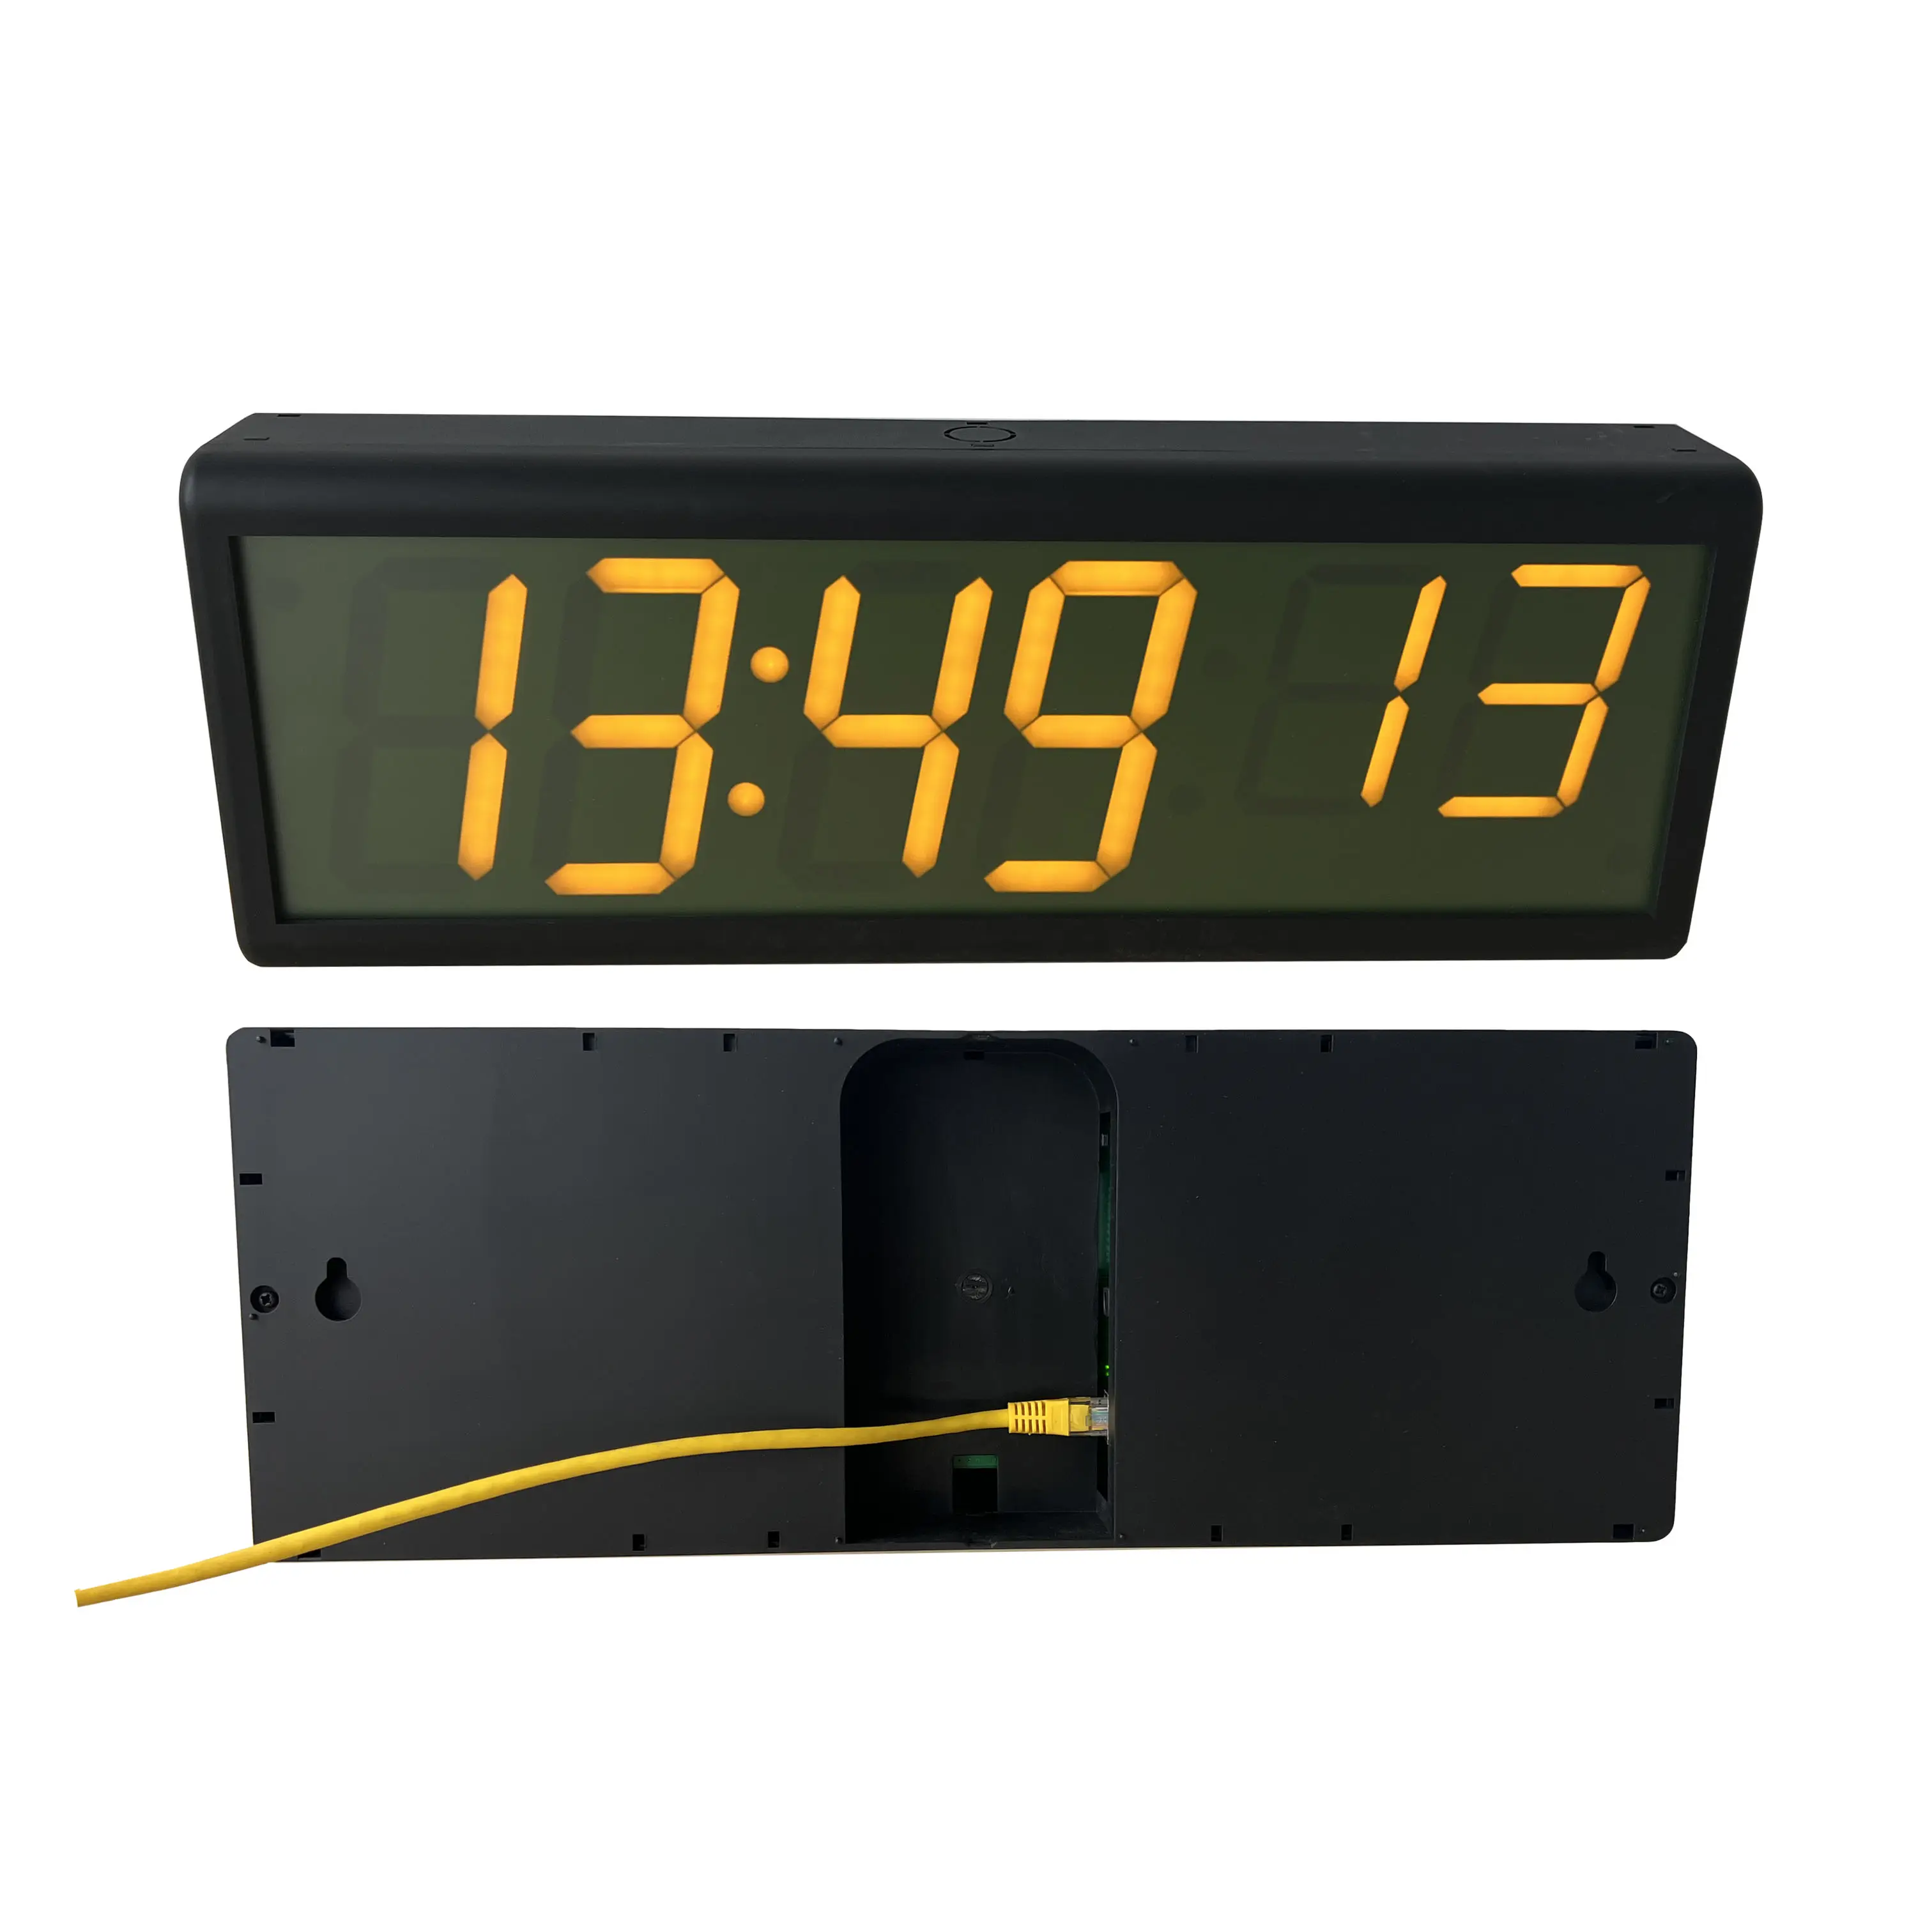 GlobalTime Power over Ethernet Clocks, 4" 6 Digit, Yellow LEDs, Automatic Daylight Saving Time Change